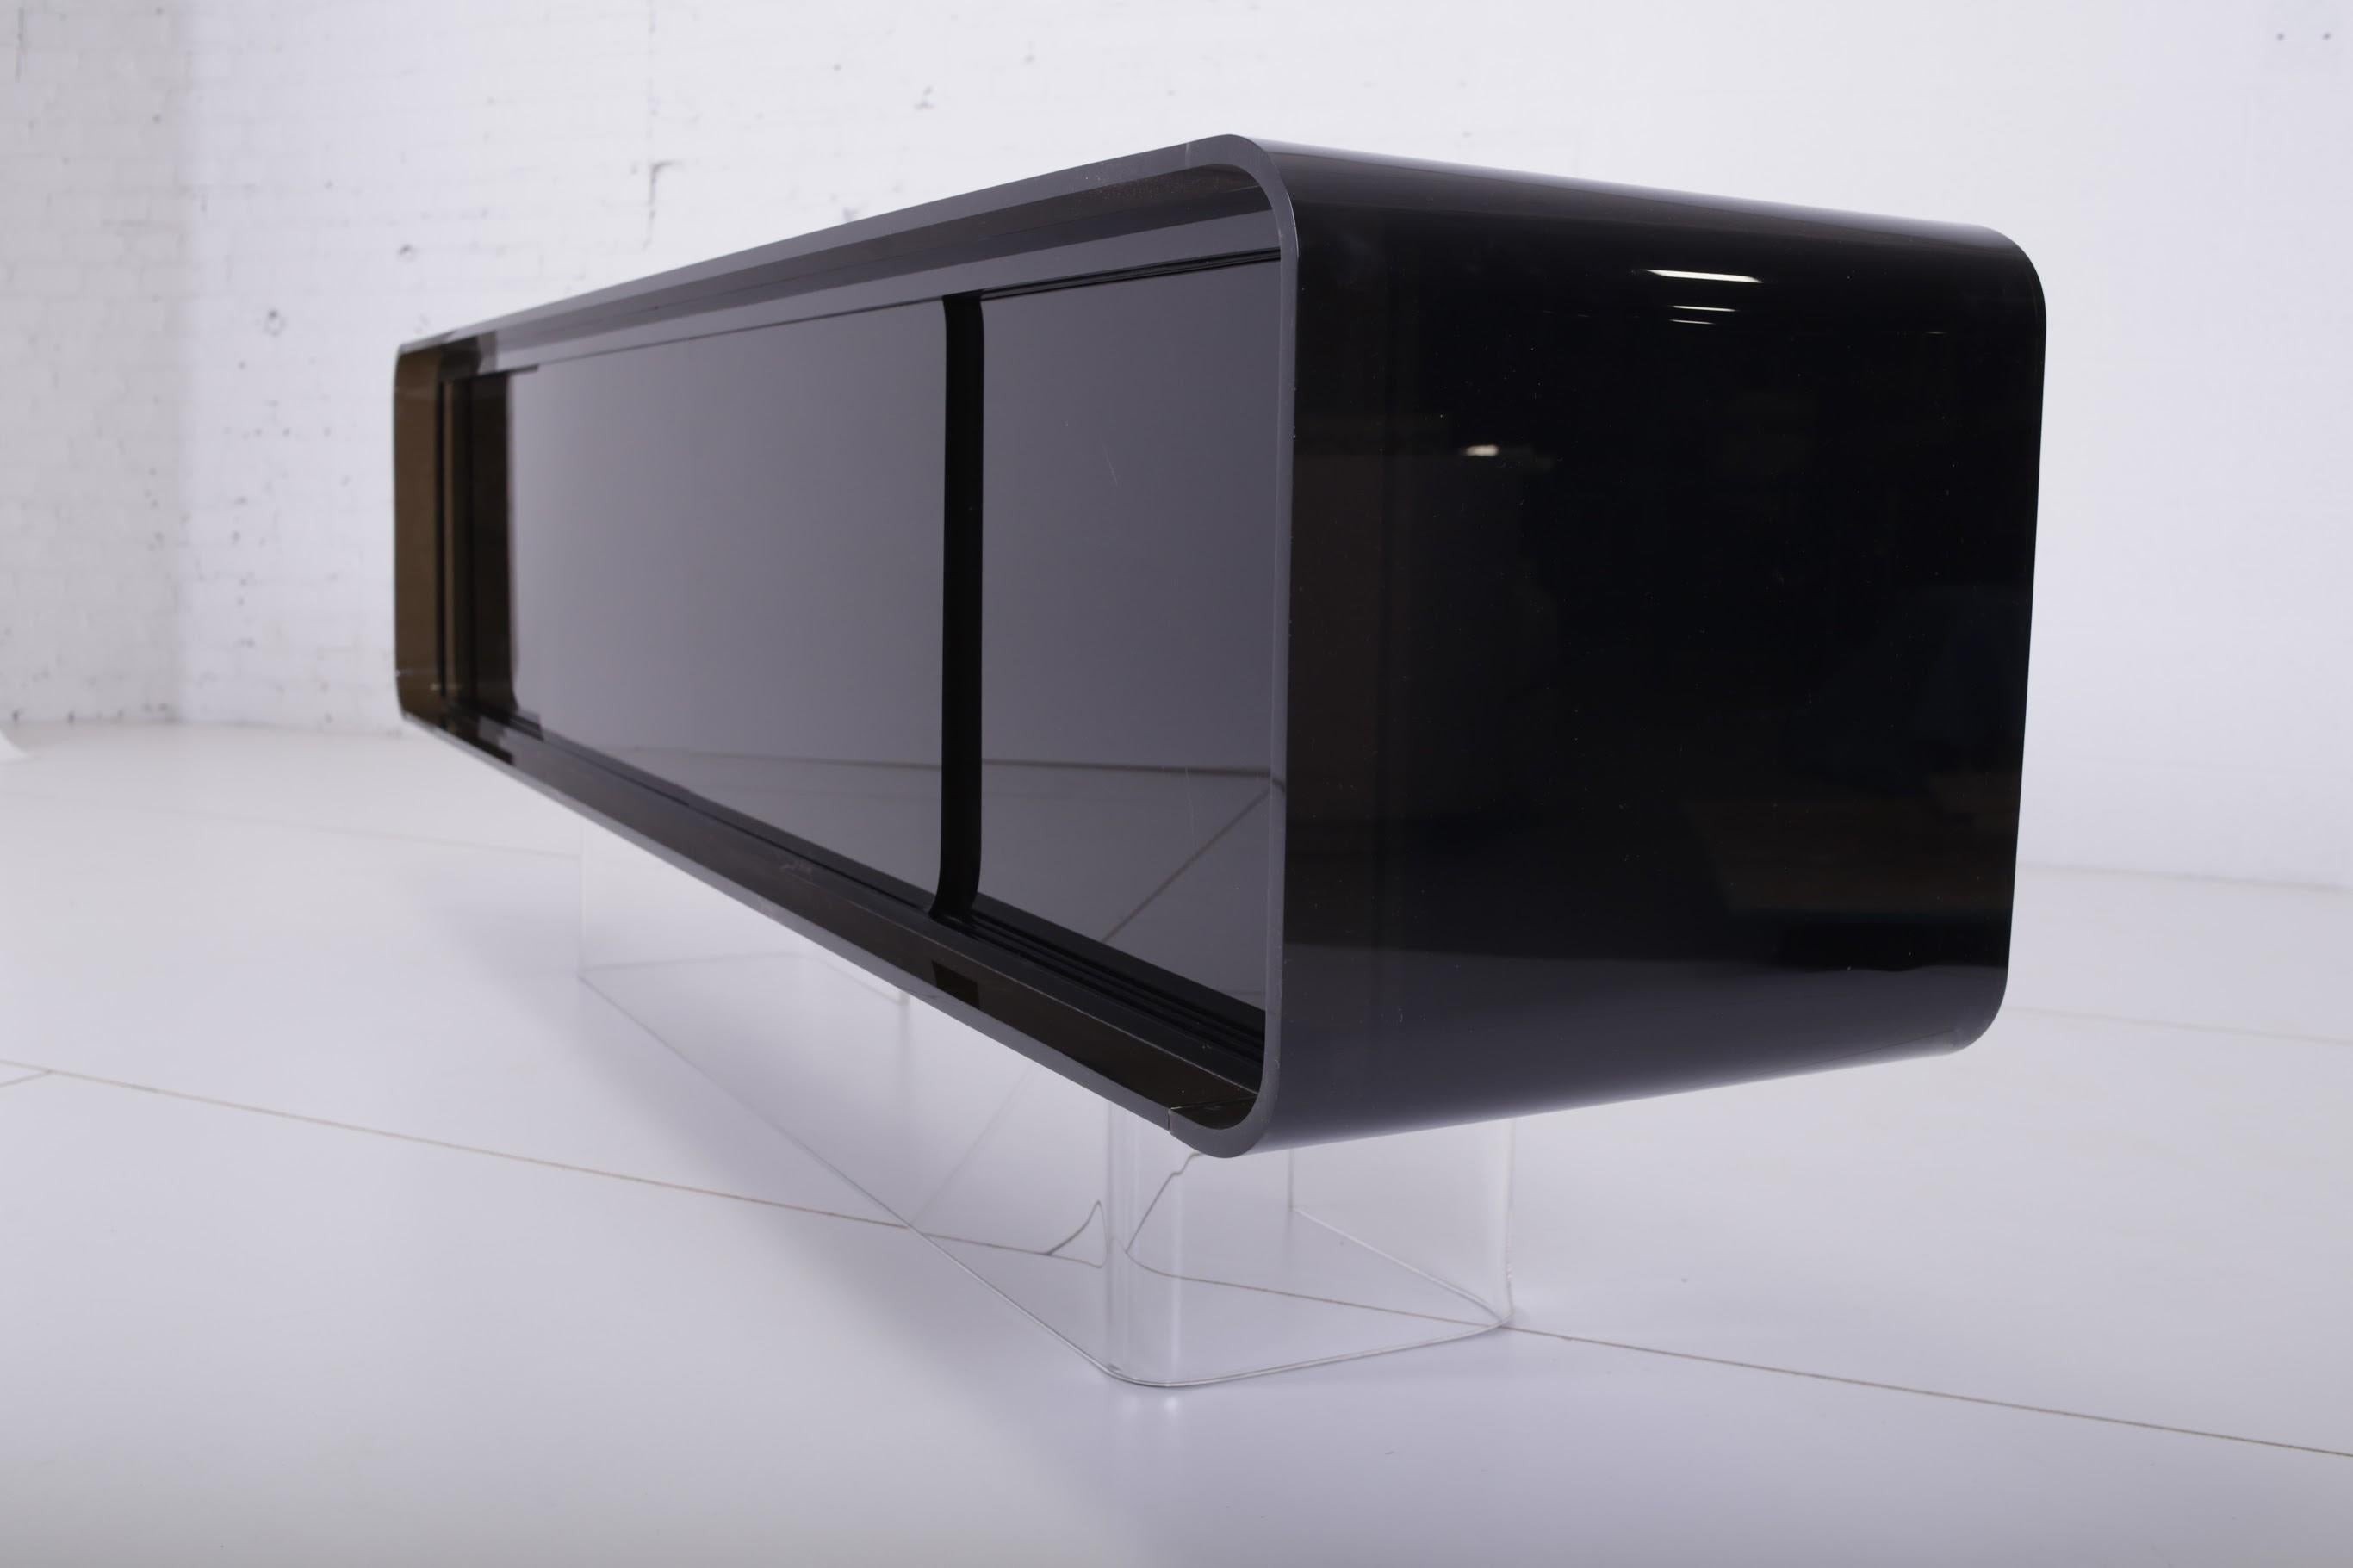 Acrylic Gary Gutterman Smoked Lucite Credenza, 1978